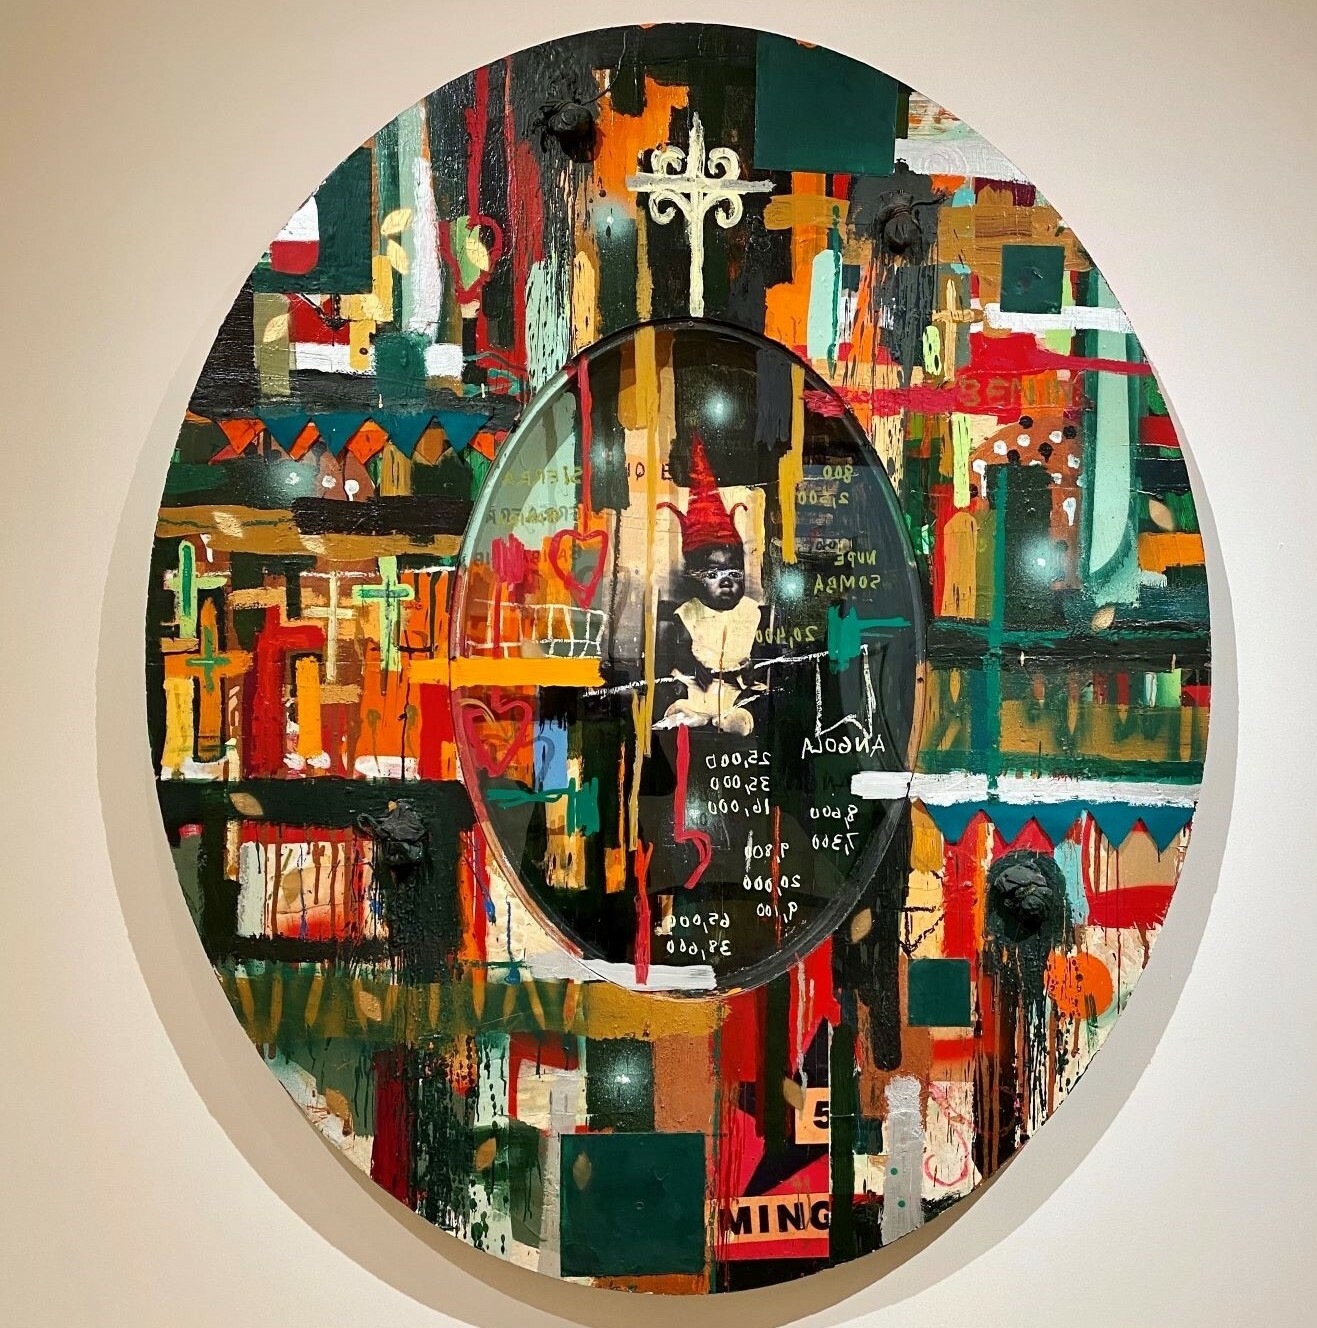 Radcliffe Bailey, "Sacred Cosmos," 2003, Mixed media on wood, 82 x 69 x 5 in., General Purchase Fund, 2004.02